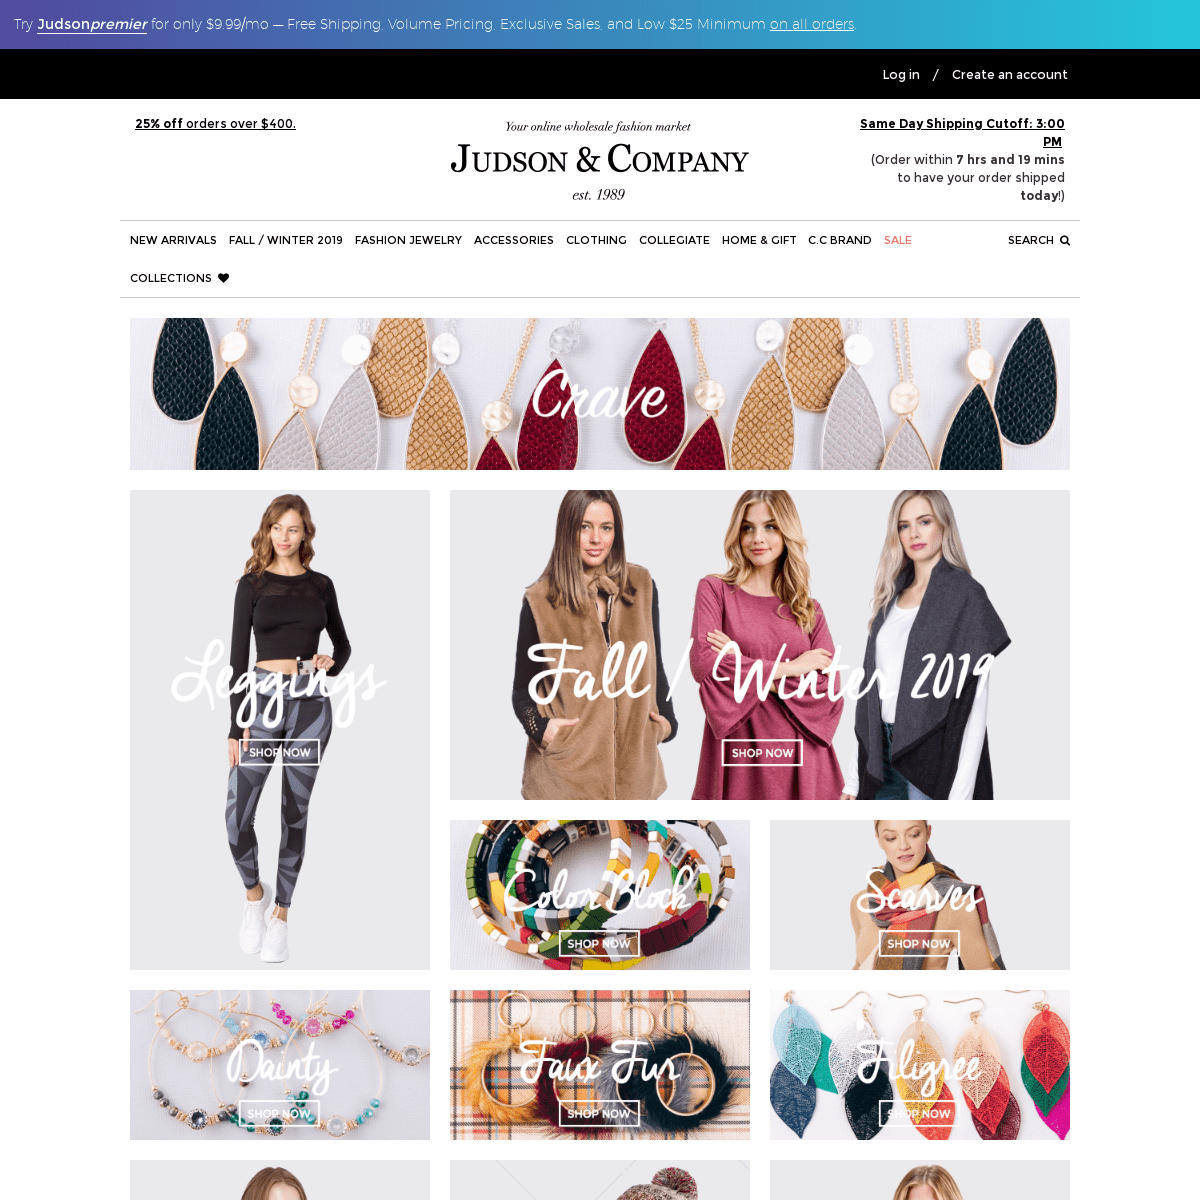 Wholesale fashion jewelry, apparel, and boutique trends